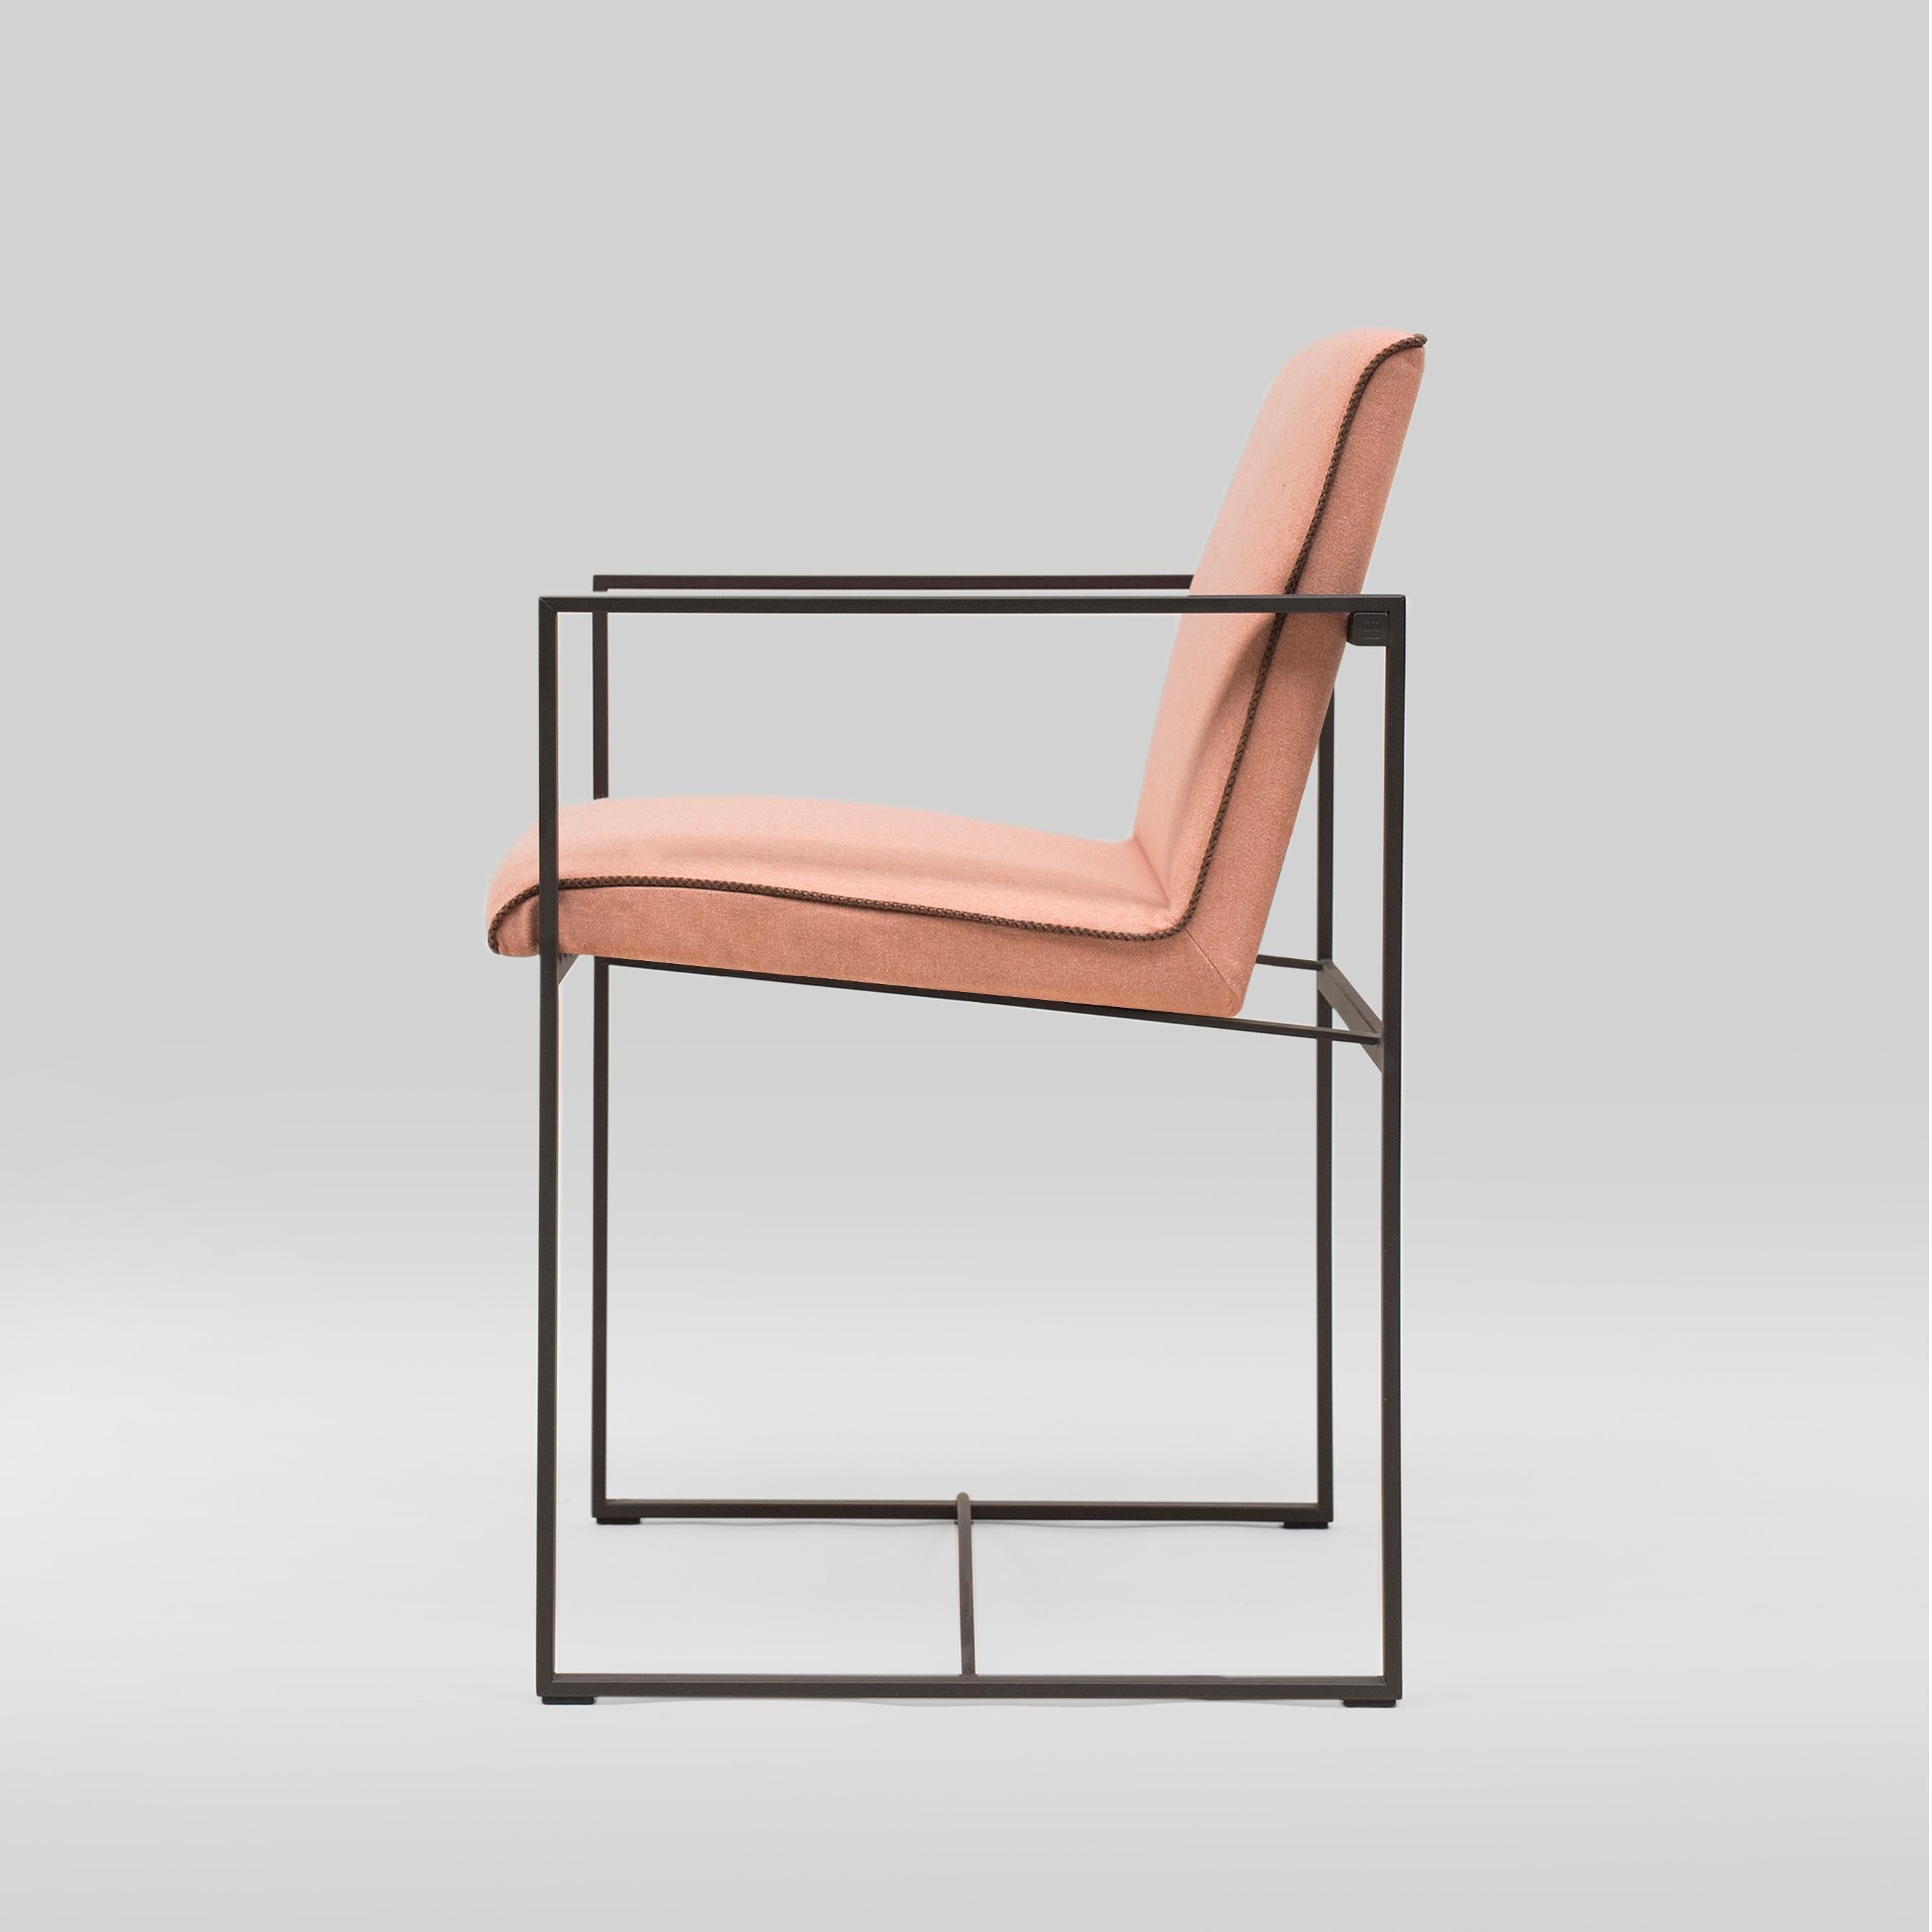 Armchair designed by Peter Ghyczy in 2018.
Manufactured by Ghyczy (Netherlands)

Material and color:
Frame Ristretto
Cast Part Ristretto
Fabric V/09 (Q4)
Piping C braided leather (no. 593)

Dimensions
L52 x W50 x H47

Production delay: